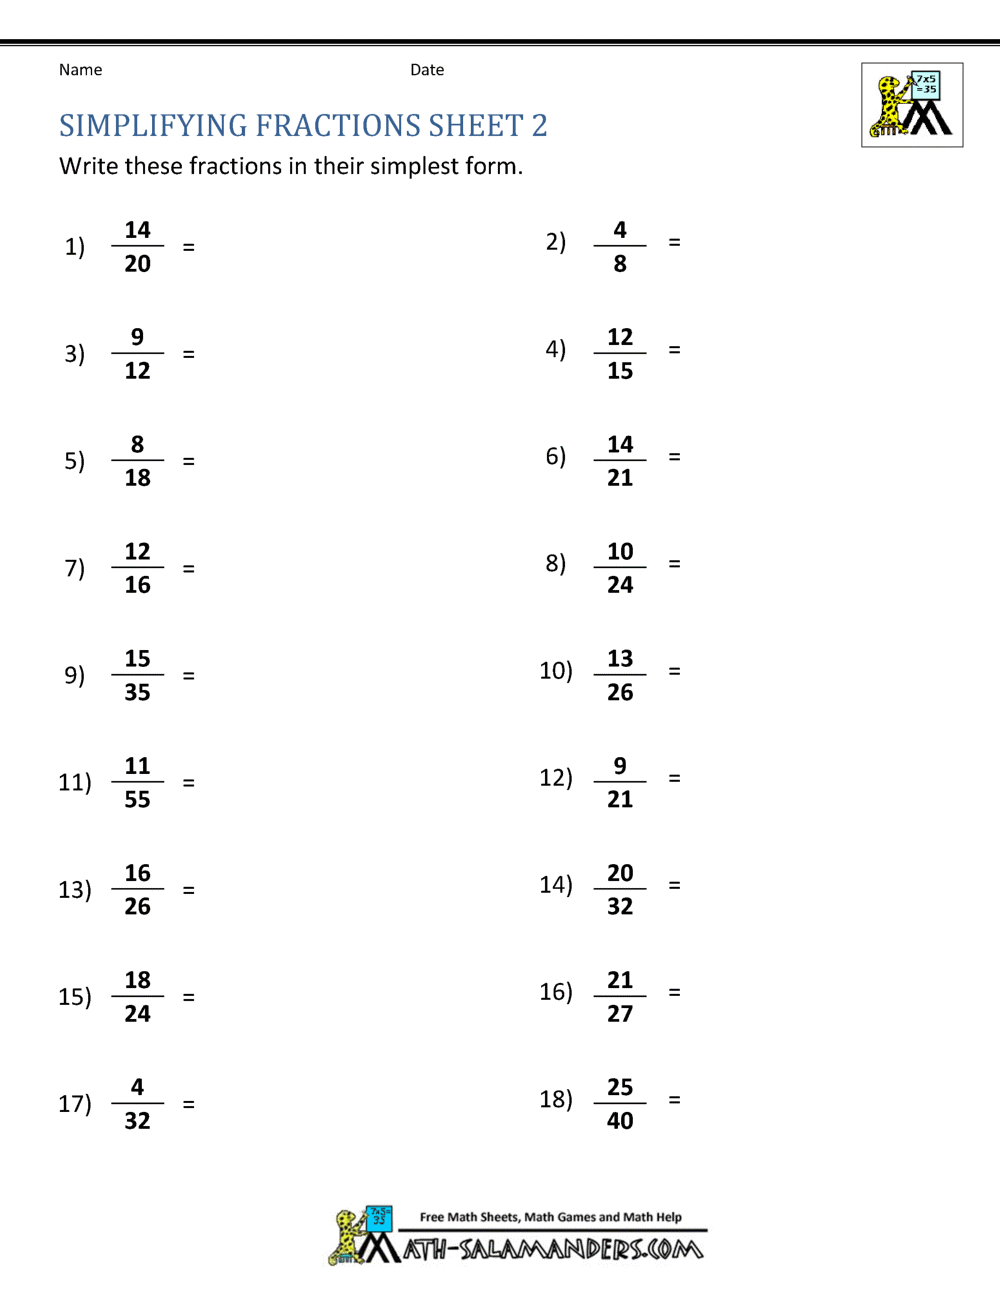 Simplifying Fractions Worksheet With Reducing Fractions Worksheet Pdf